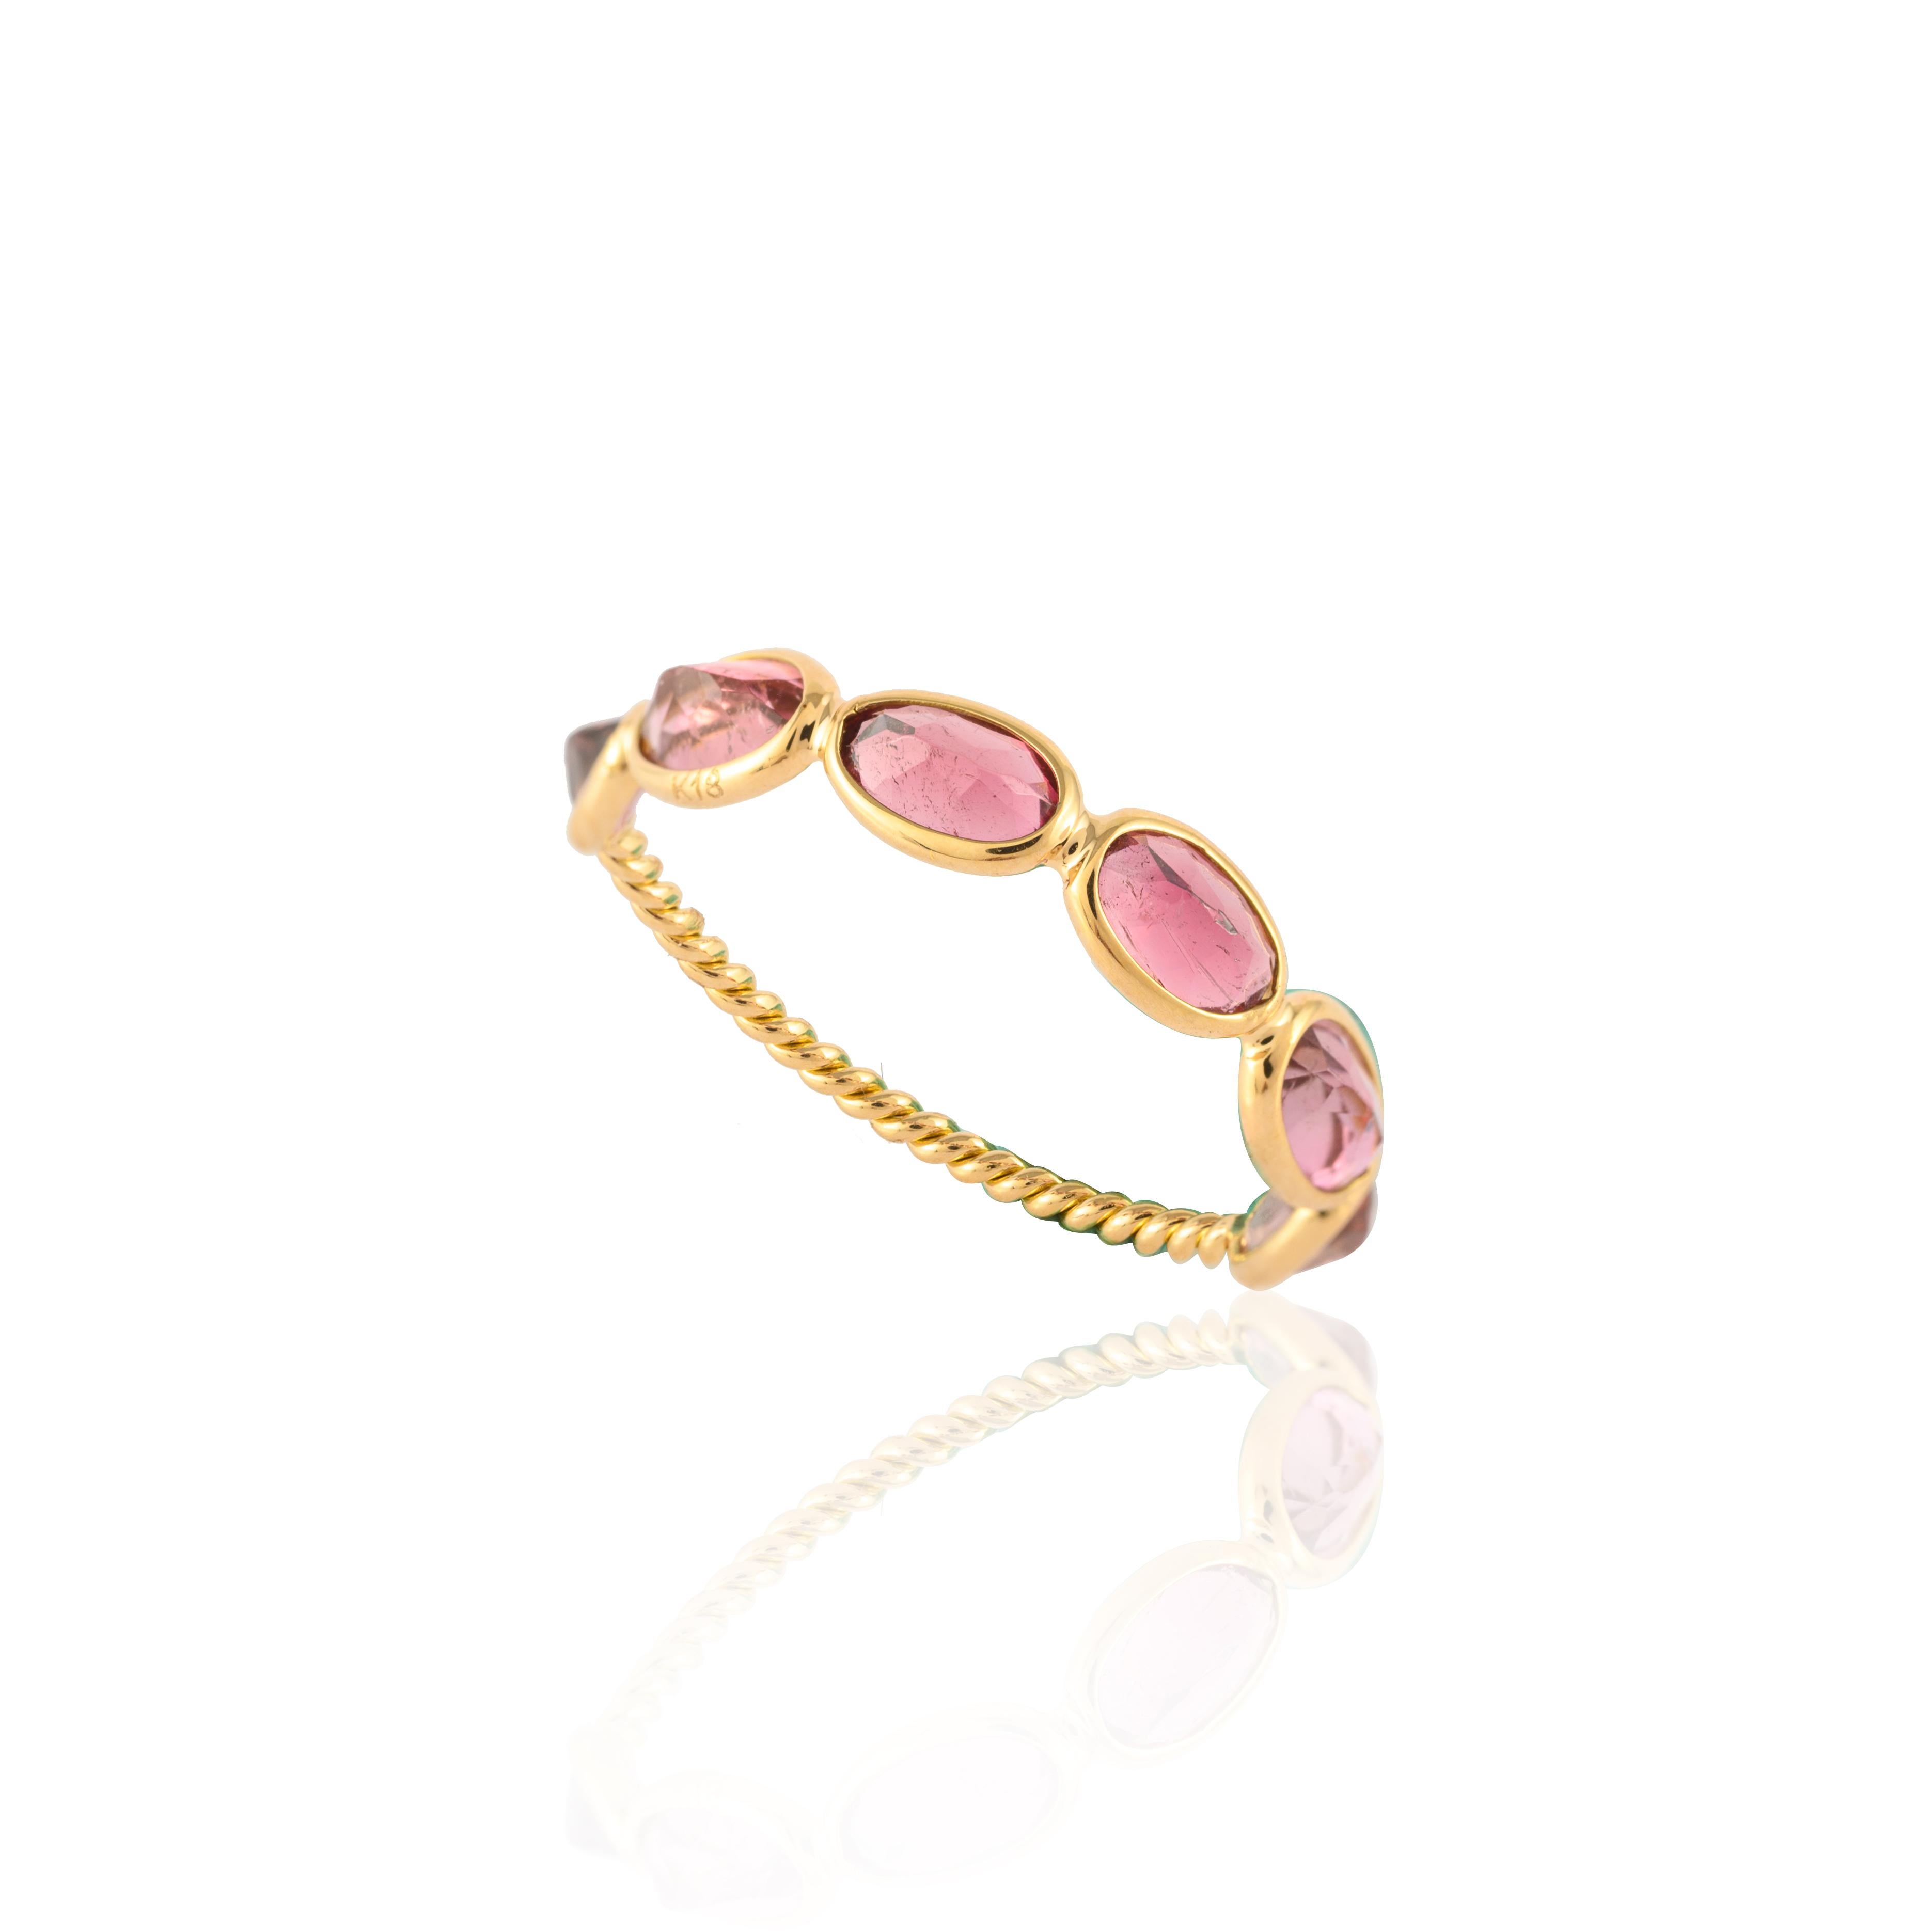 For Sale:  Minimalist Pink Tourmaline Half Eternity Band Ring in 18k Yellow Gold 11